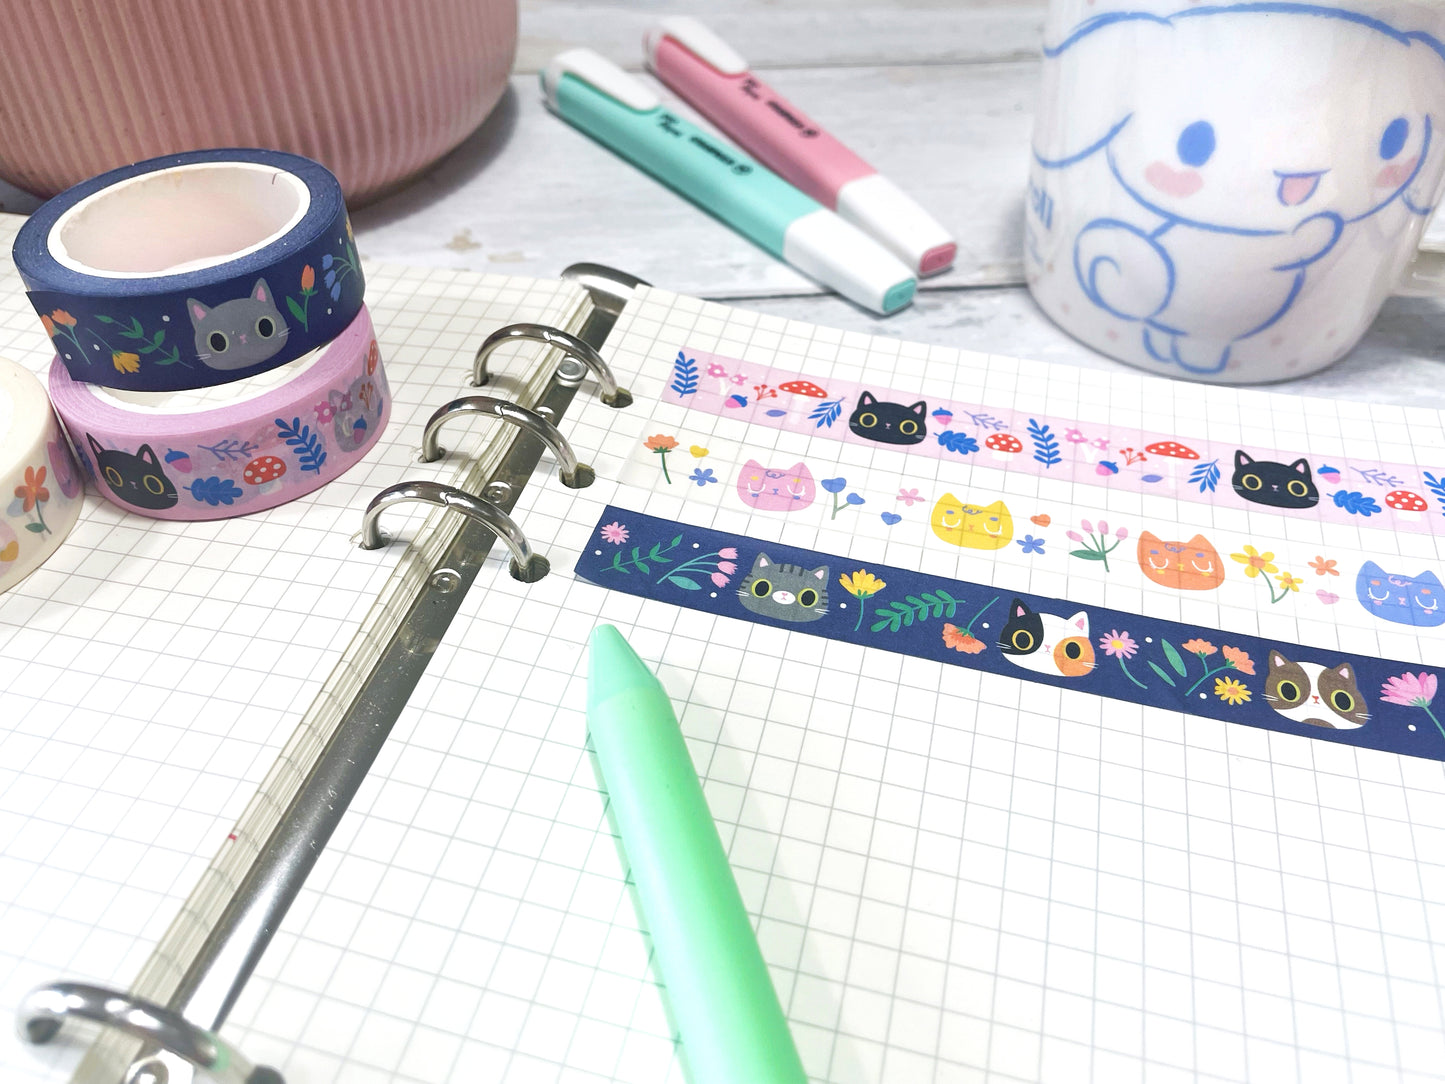 Spring Cats Kawaii Washi Tape - Super cute stationery for cat lovers